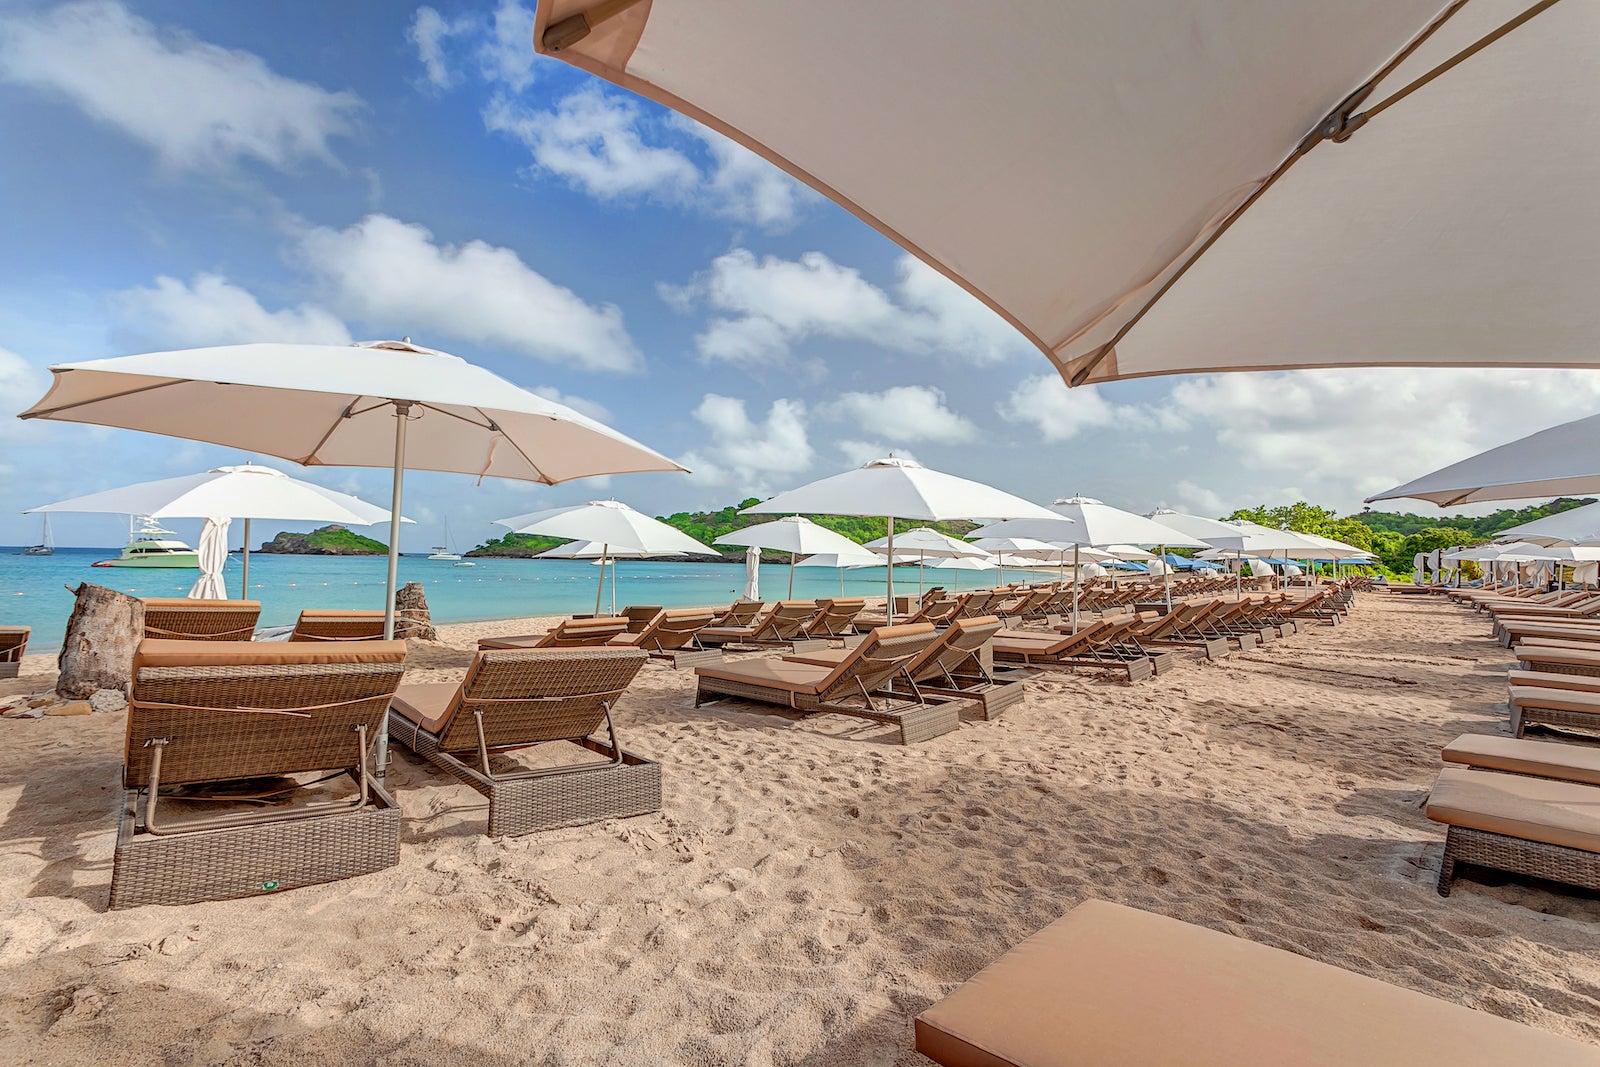 beautiful beach with chairs, umbrellas and ocean